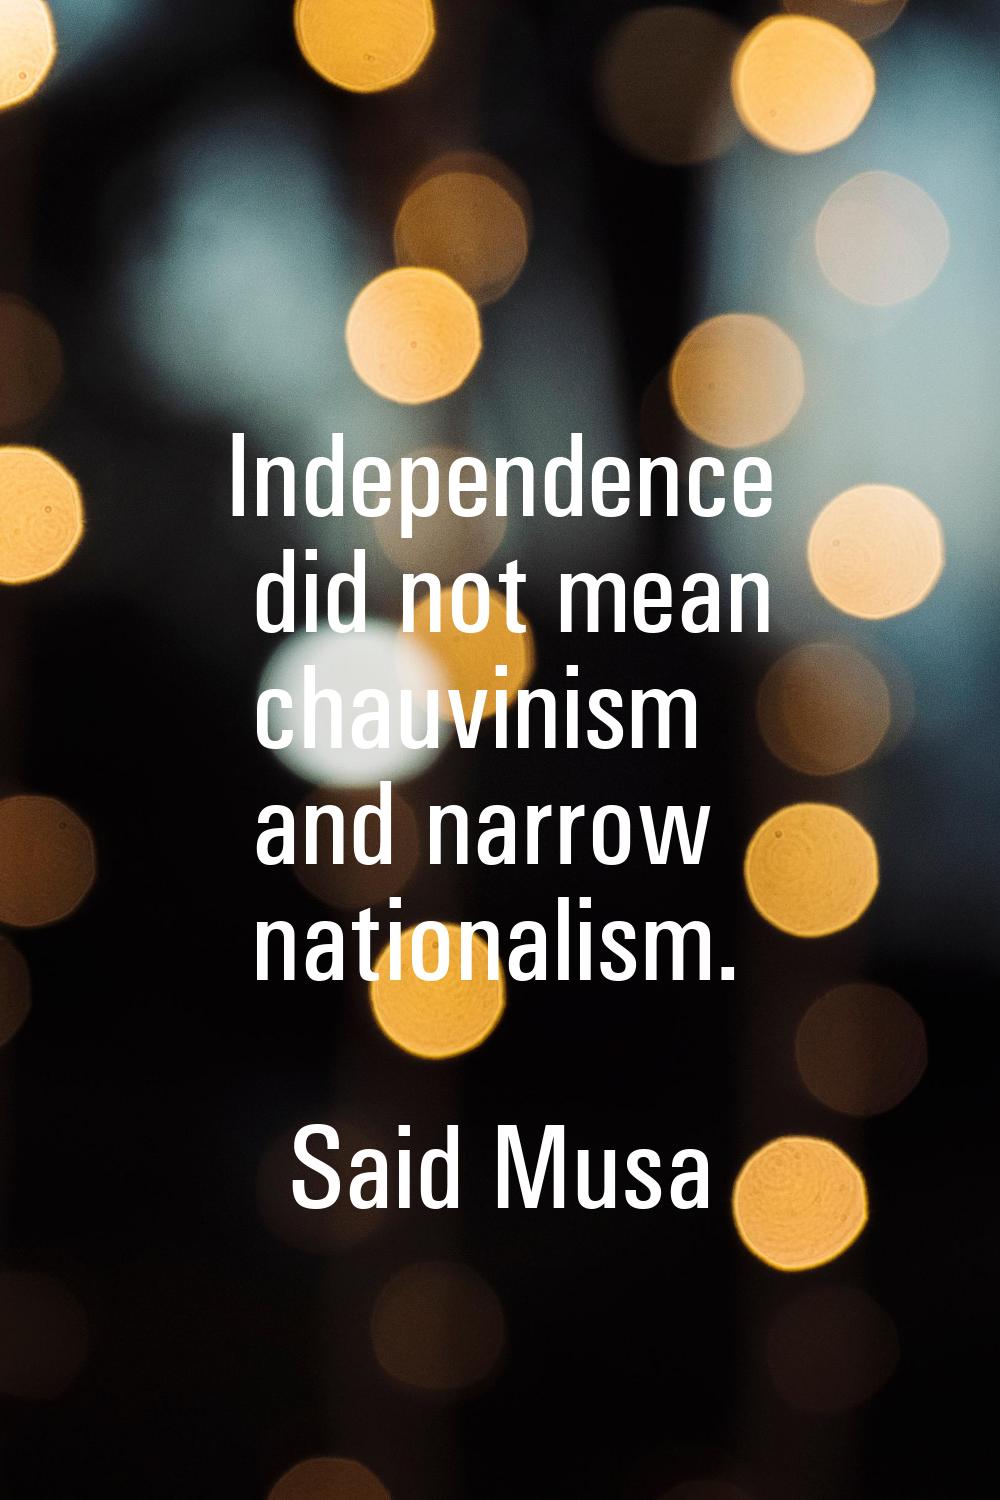 Independence did not mean chauvinism and narrow nationalism.